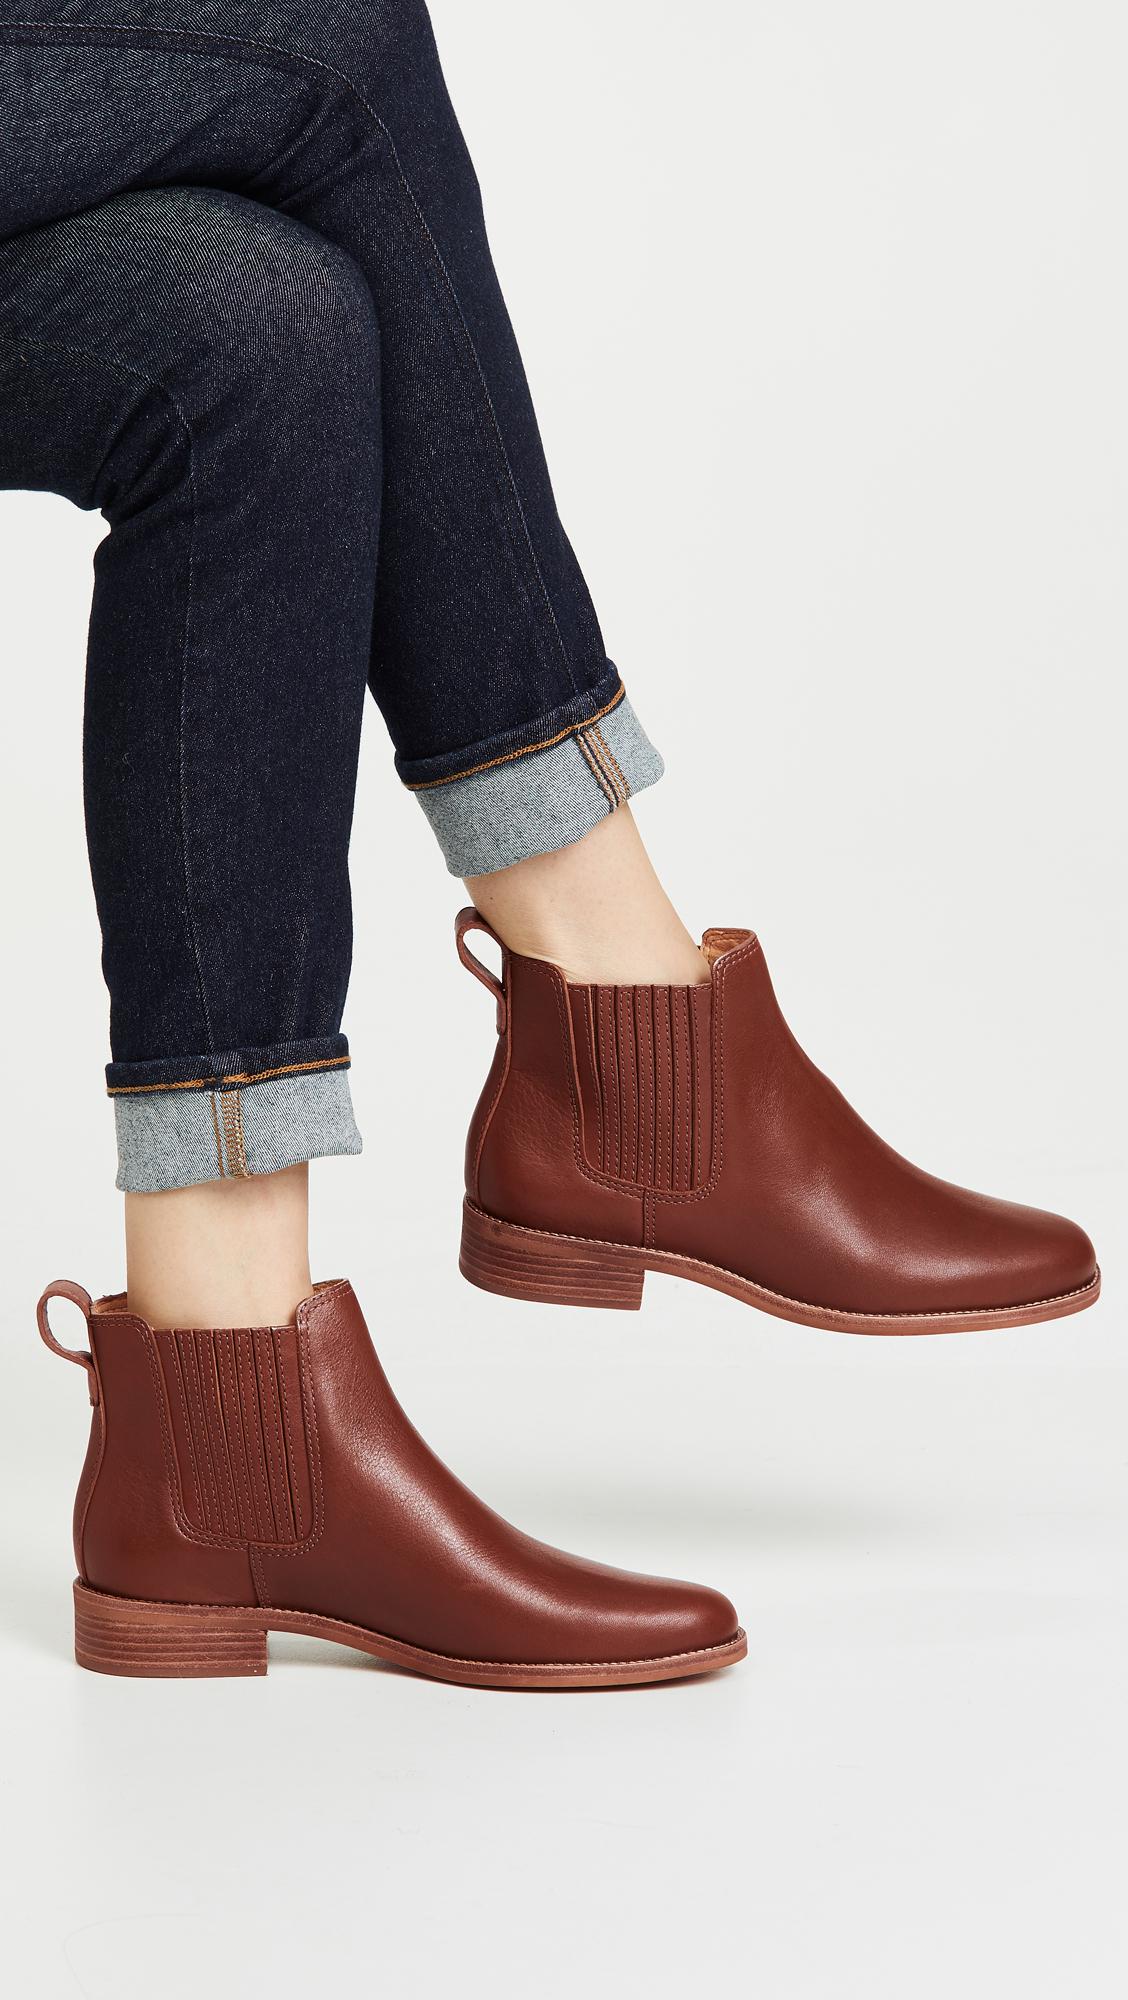 Madewell $228 The Hayes Boots 7.5 pecan ankle shoes leather b2064 brown